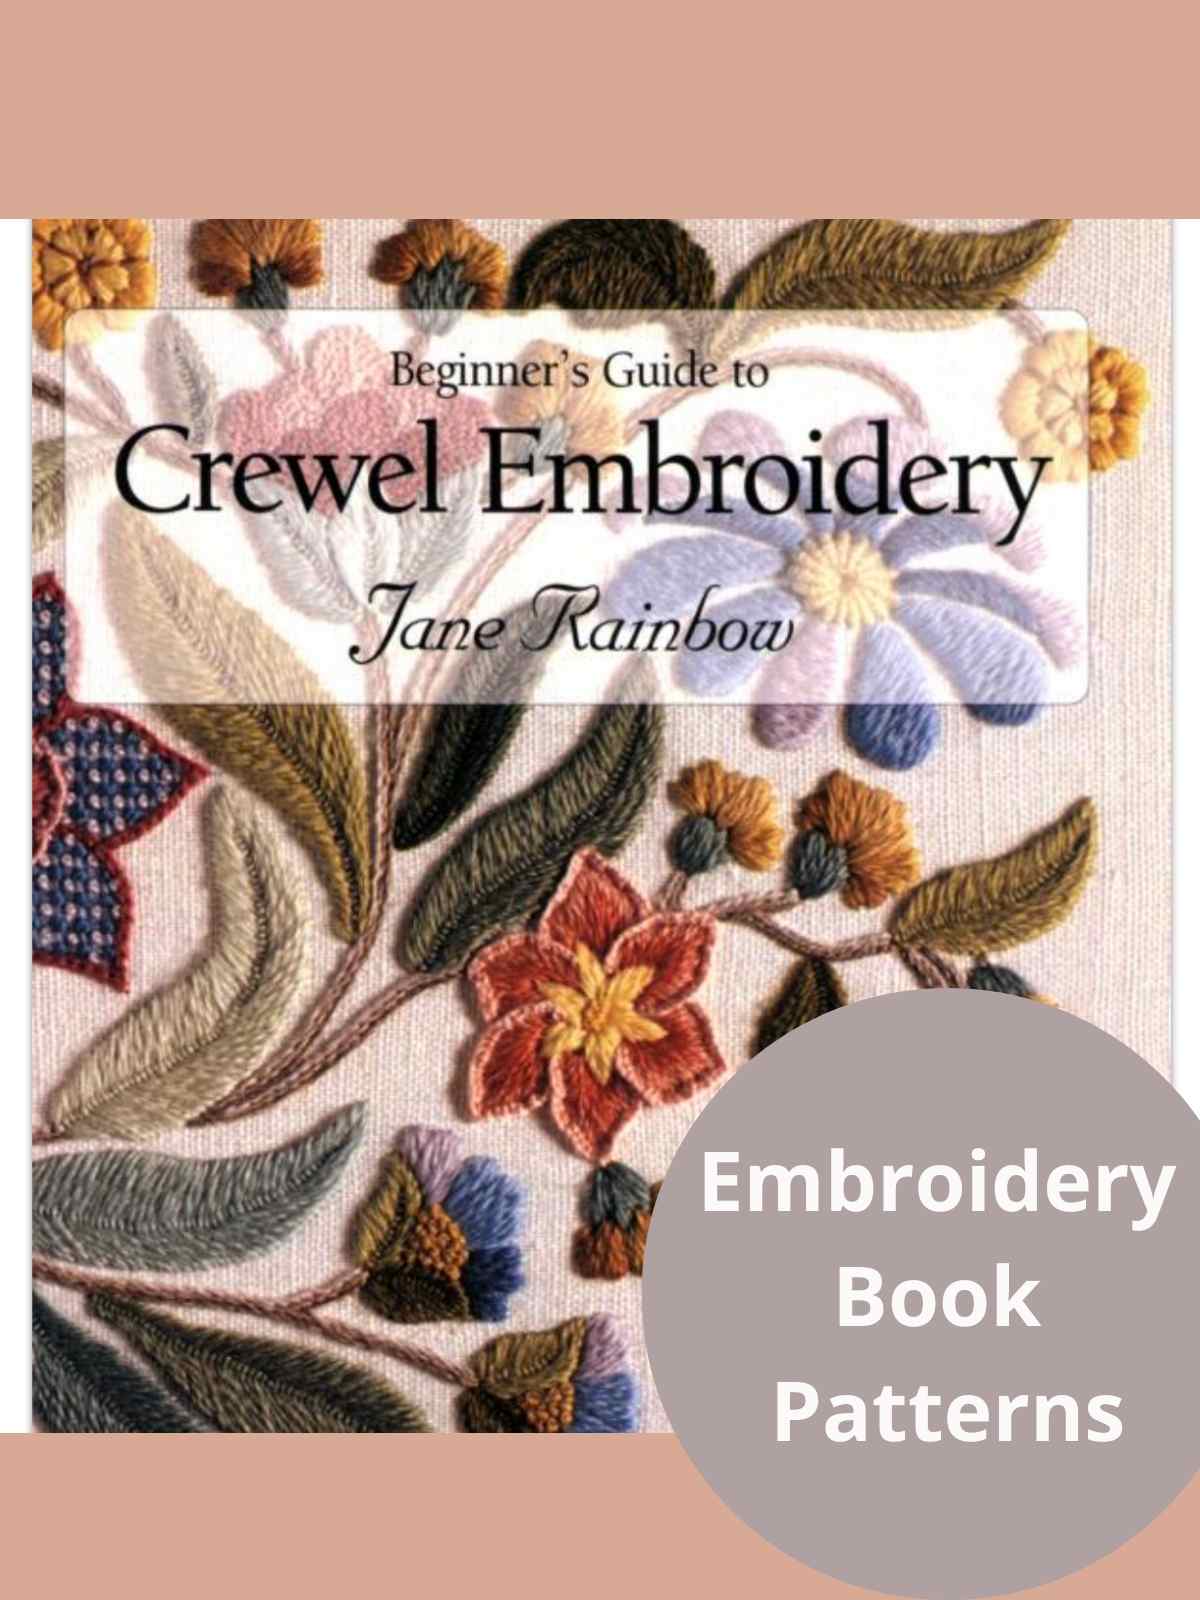 Crewel Embroidery Book